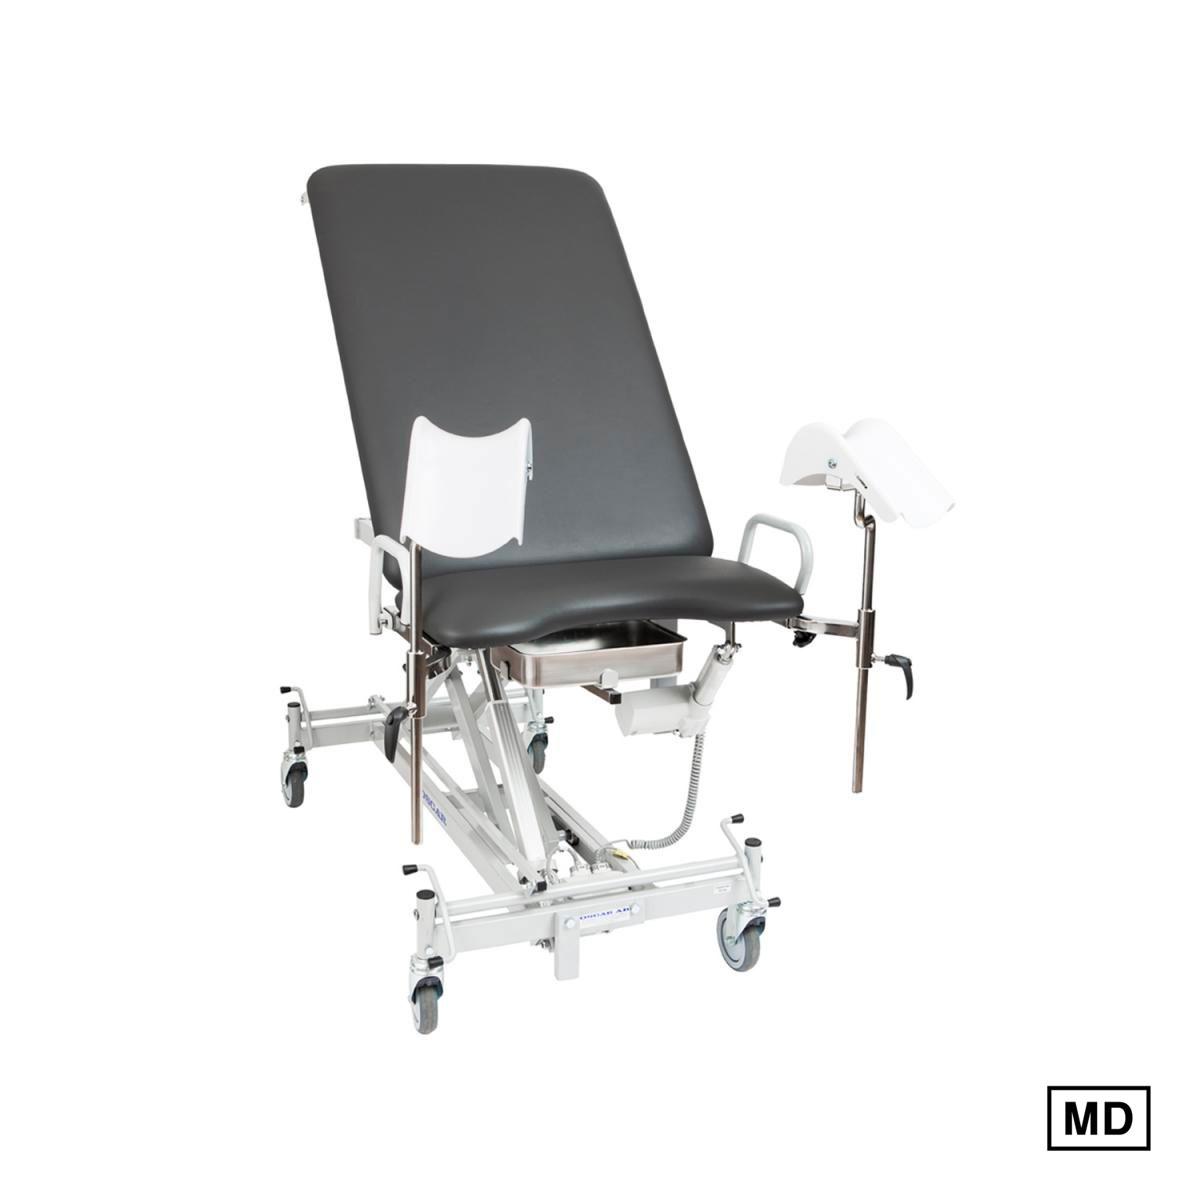 Gynaecological examination chair 036